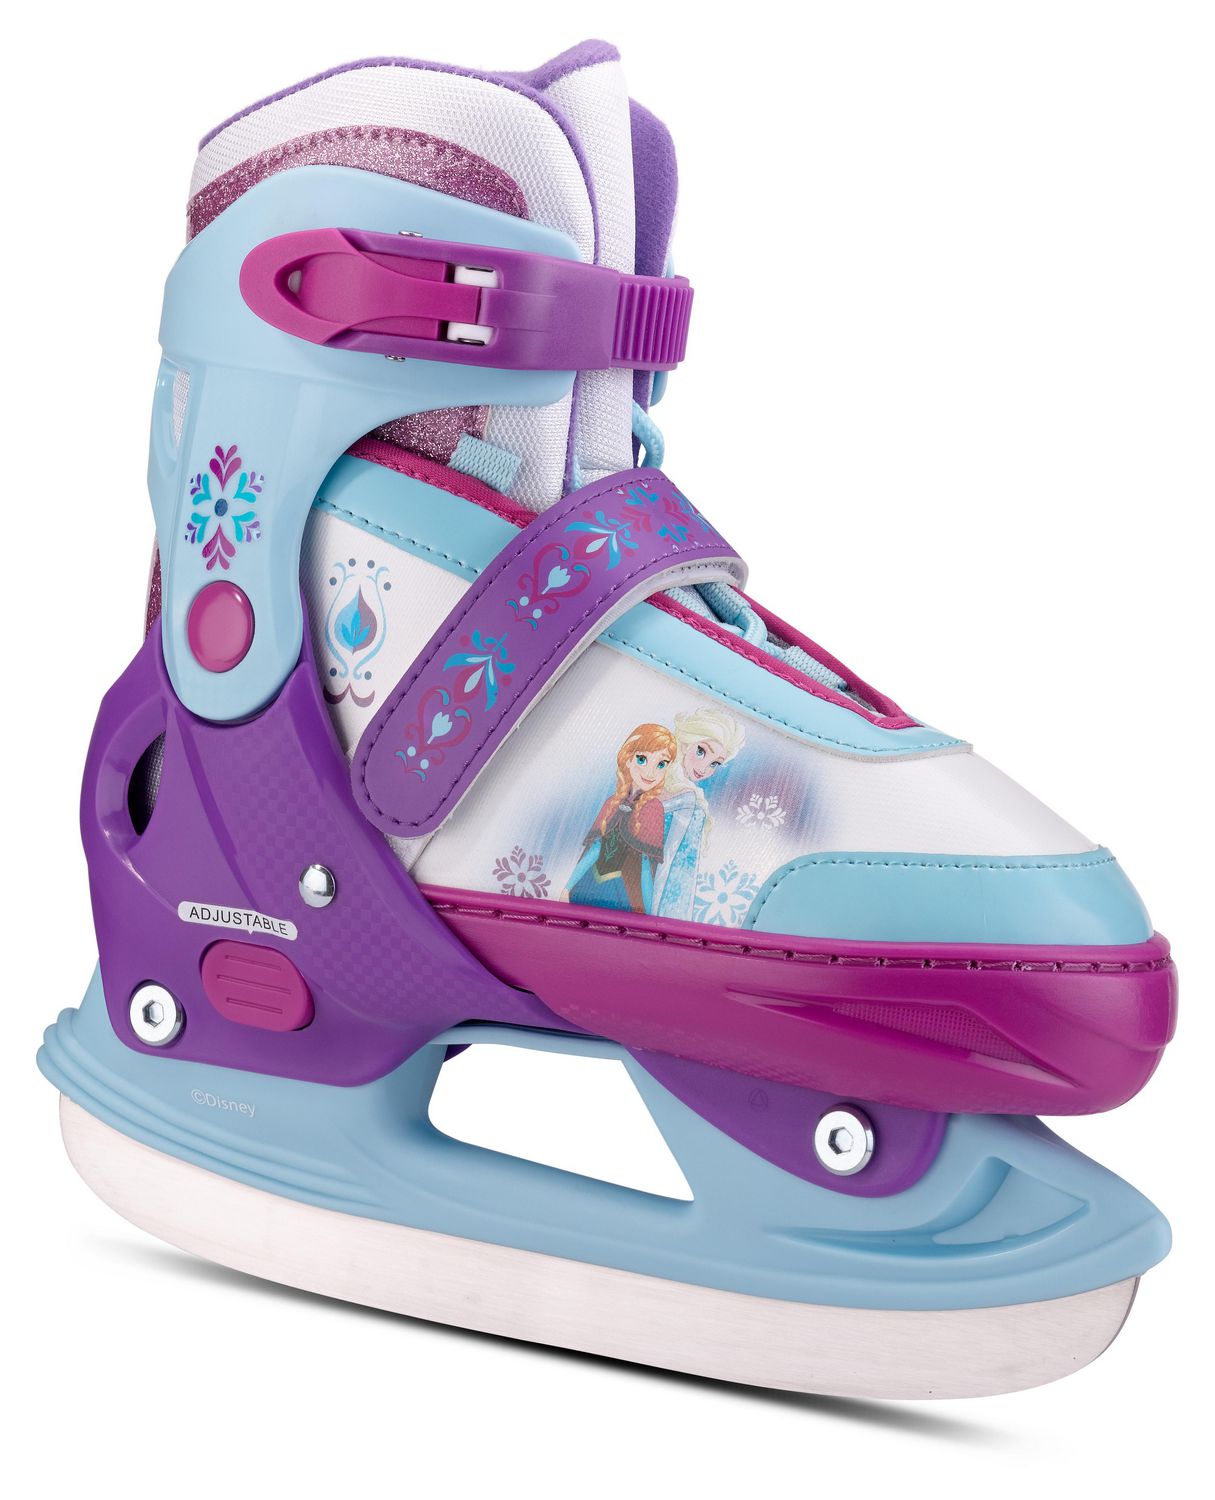 BK//BL, Small 3 Sizes ADJUSTMENTS SOFTMAX Insulated Adjustable ICE Skate for Kids